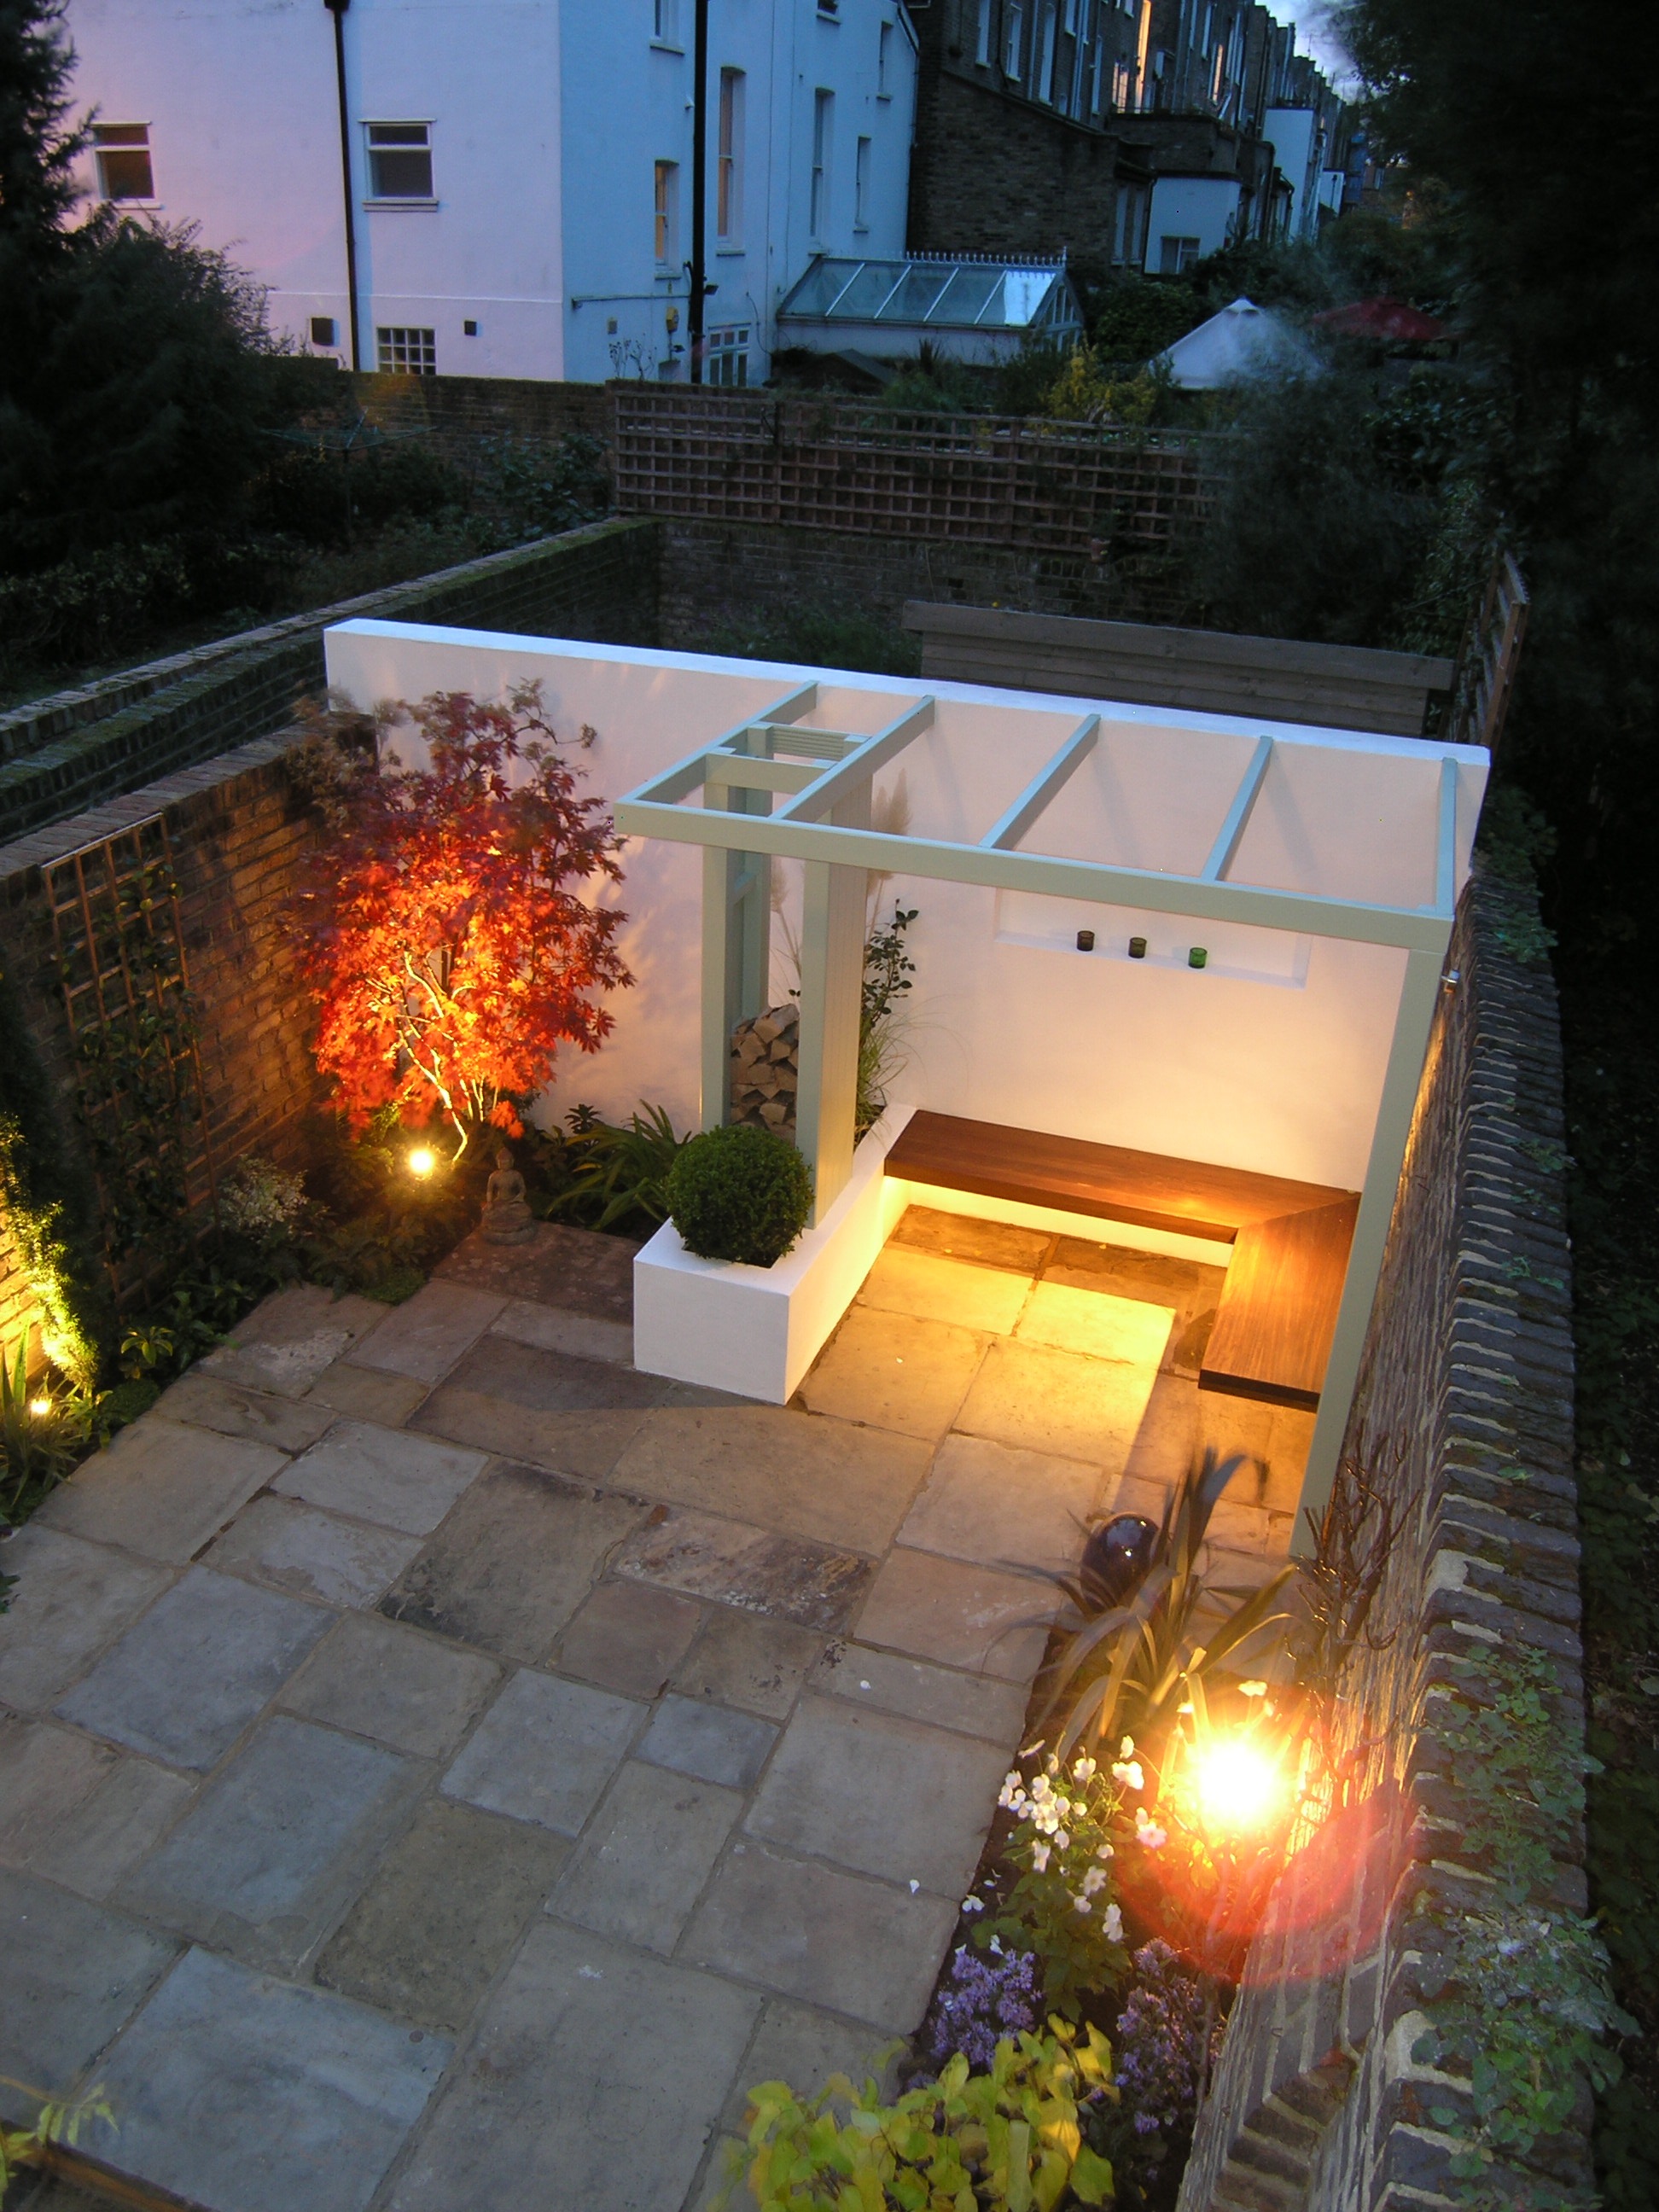 Garden design in N1 with bespoke outdoor seating area and York stone patio